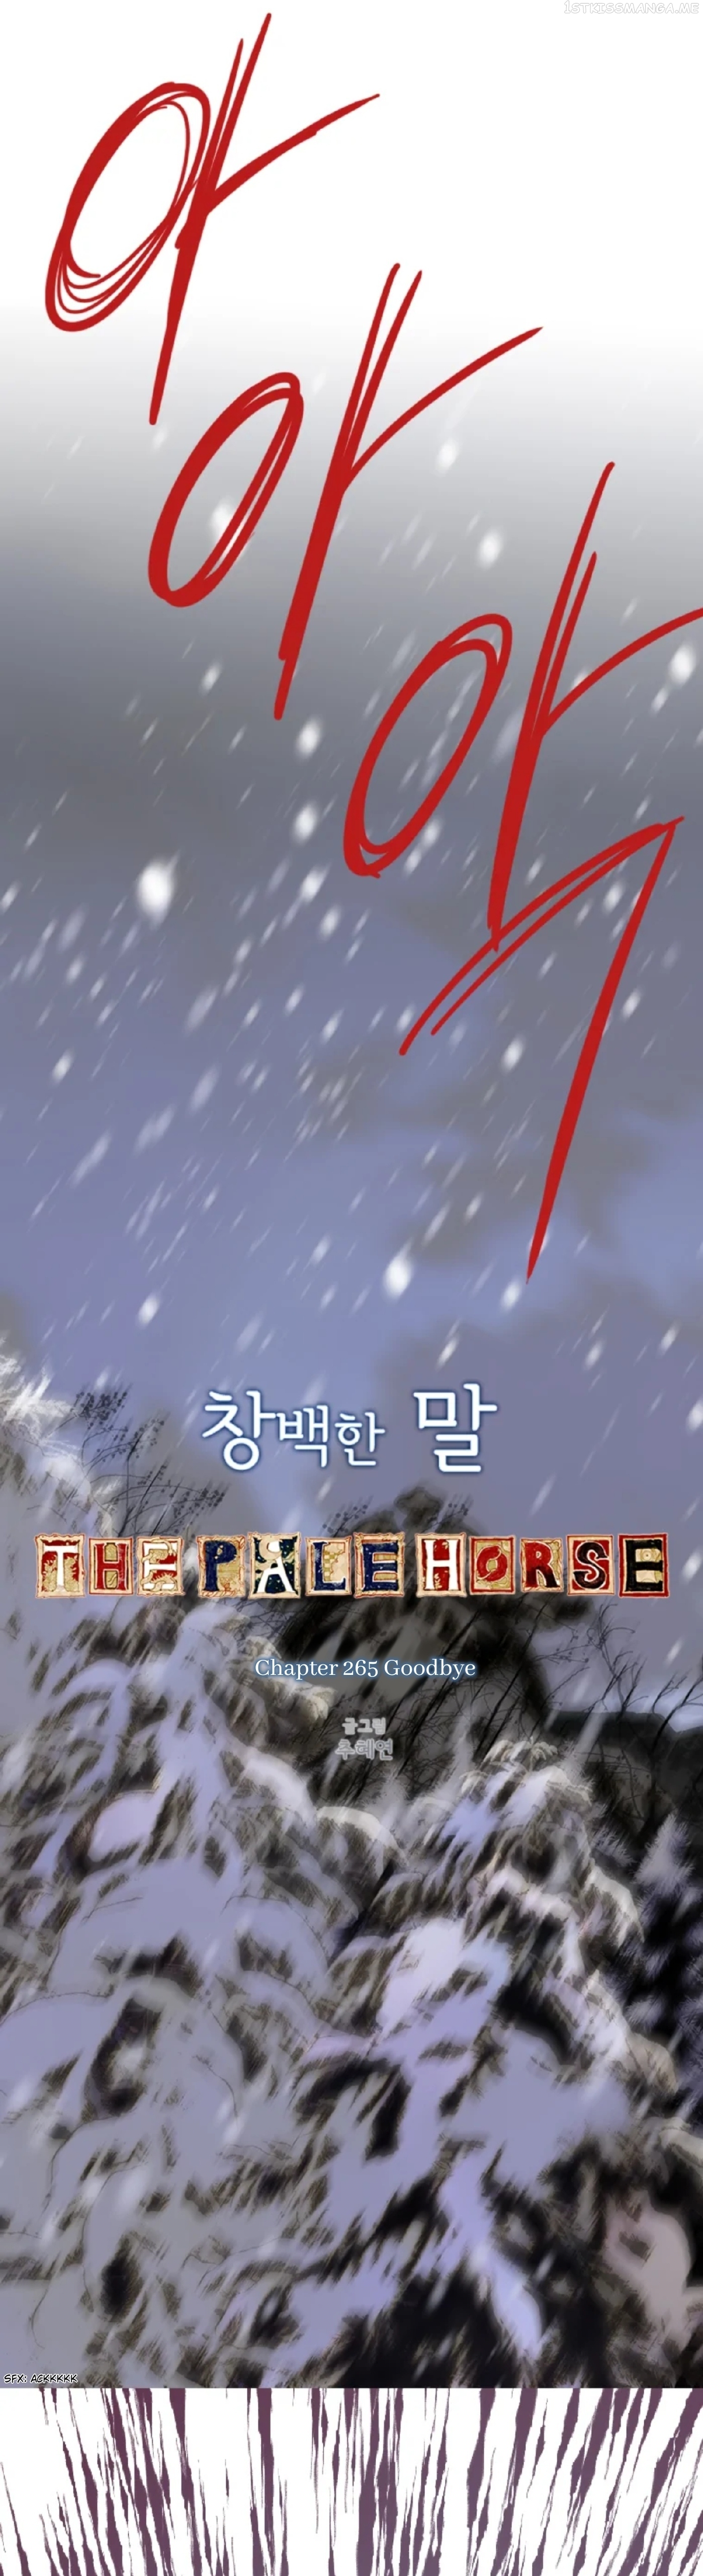 The Pale Horse - episode 291 - 6